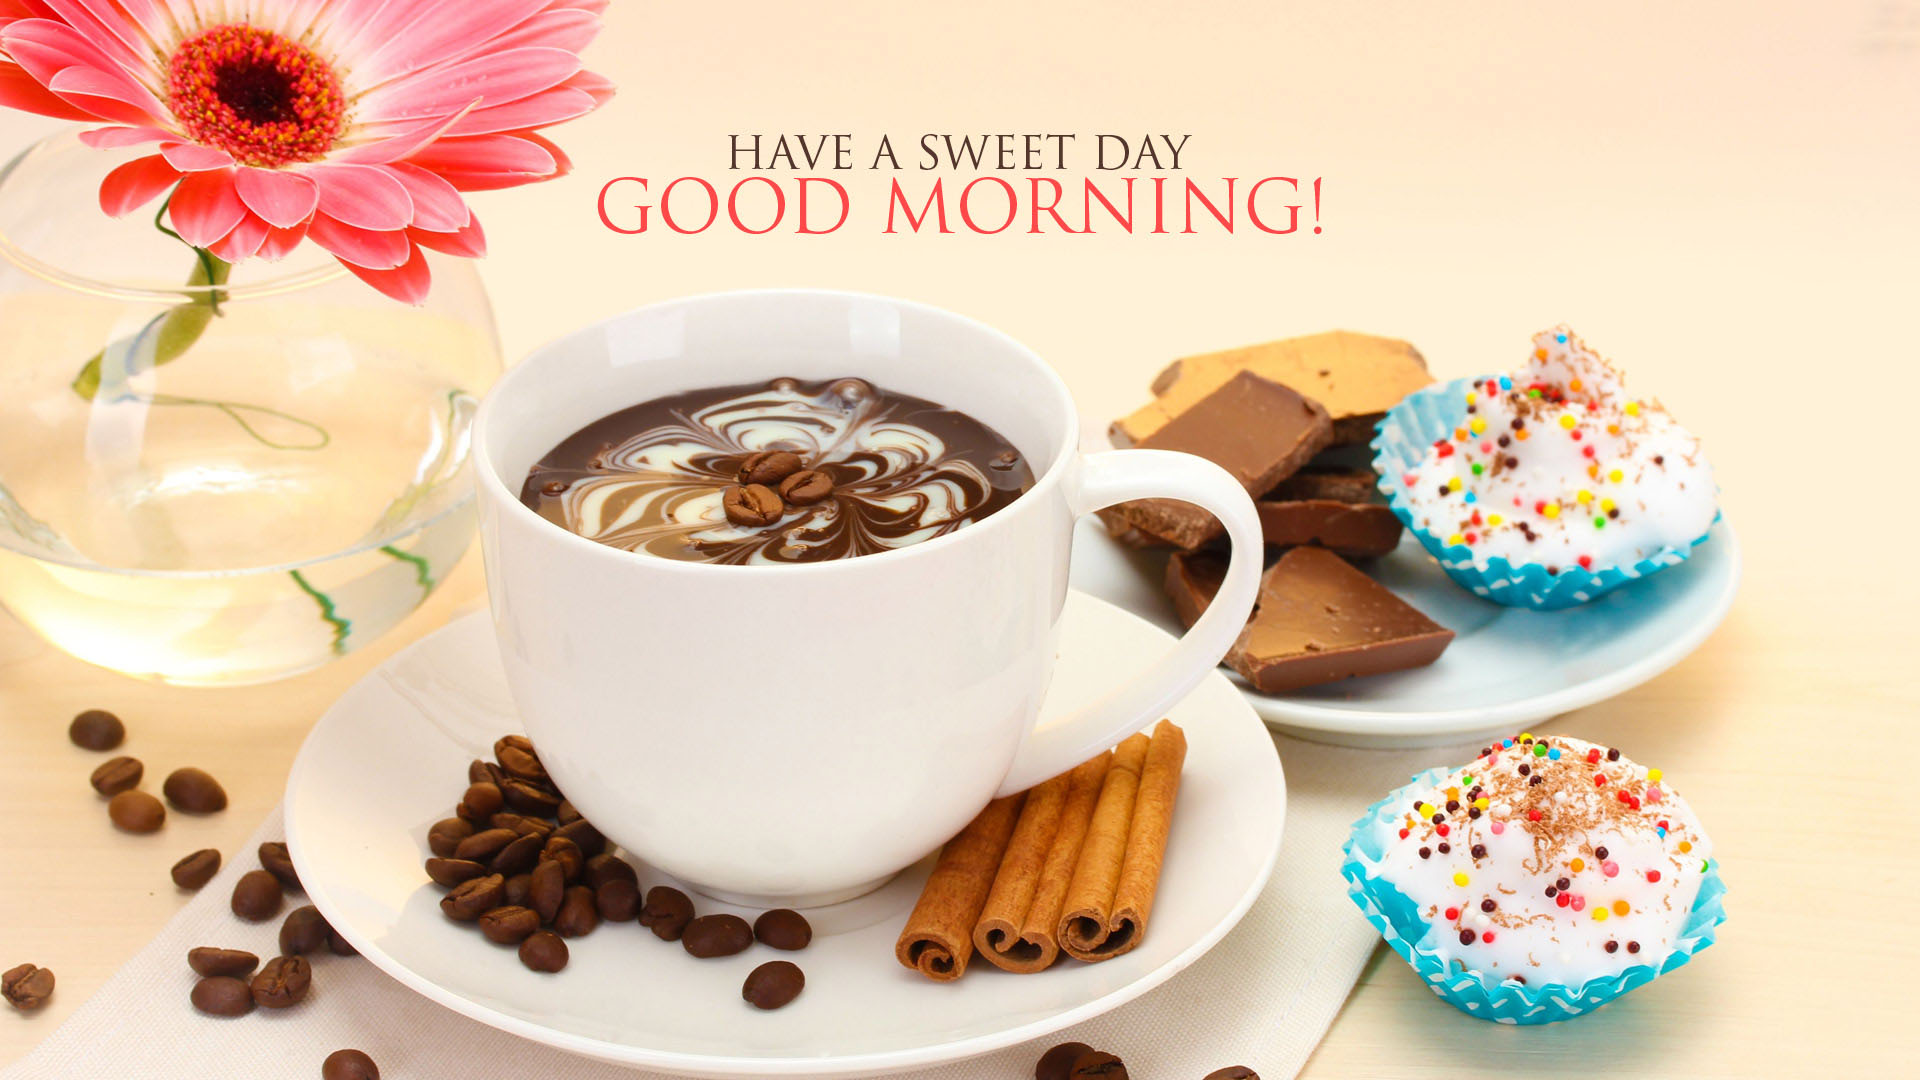 Morning Wishes HD Wallpaper Gt Good